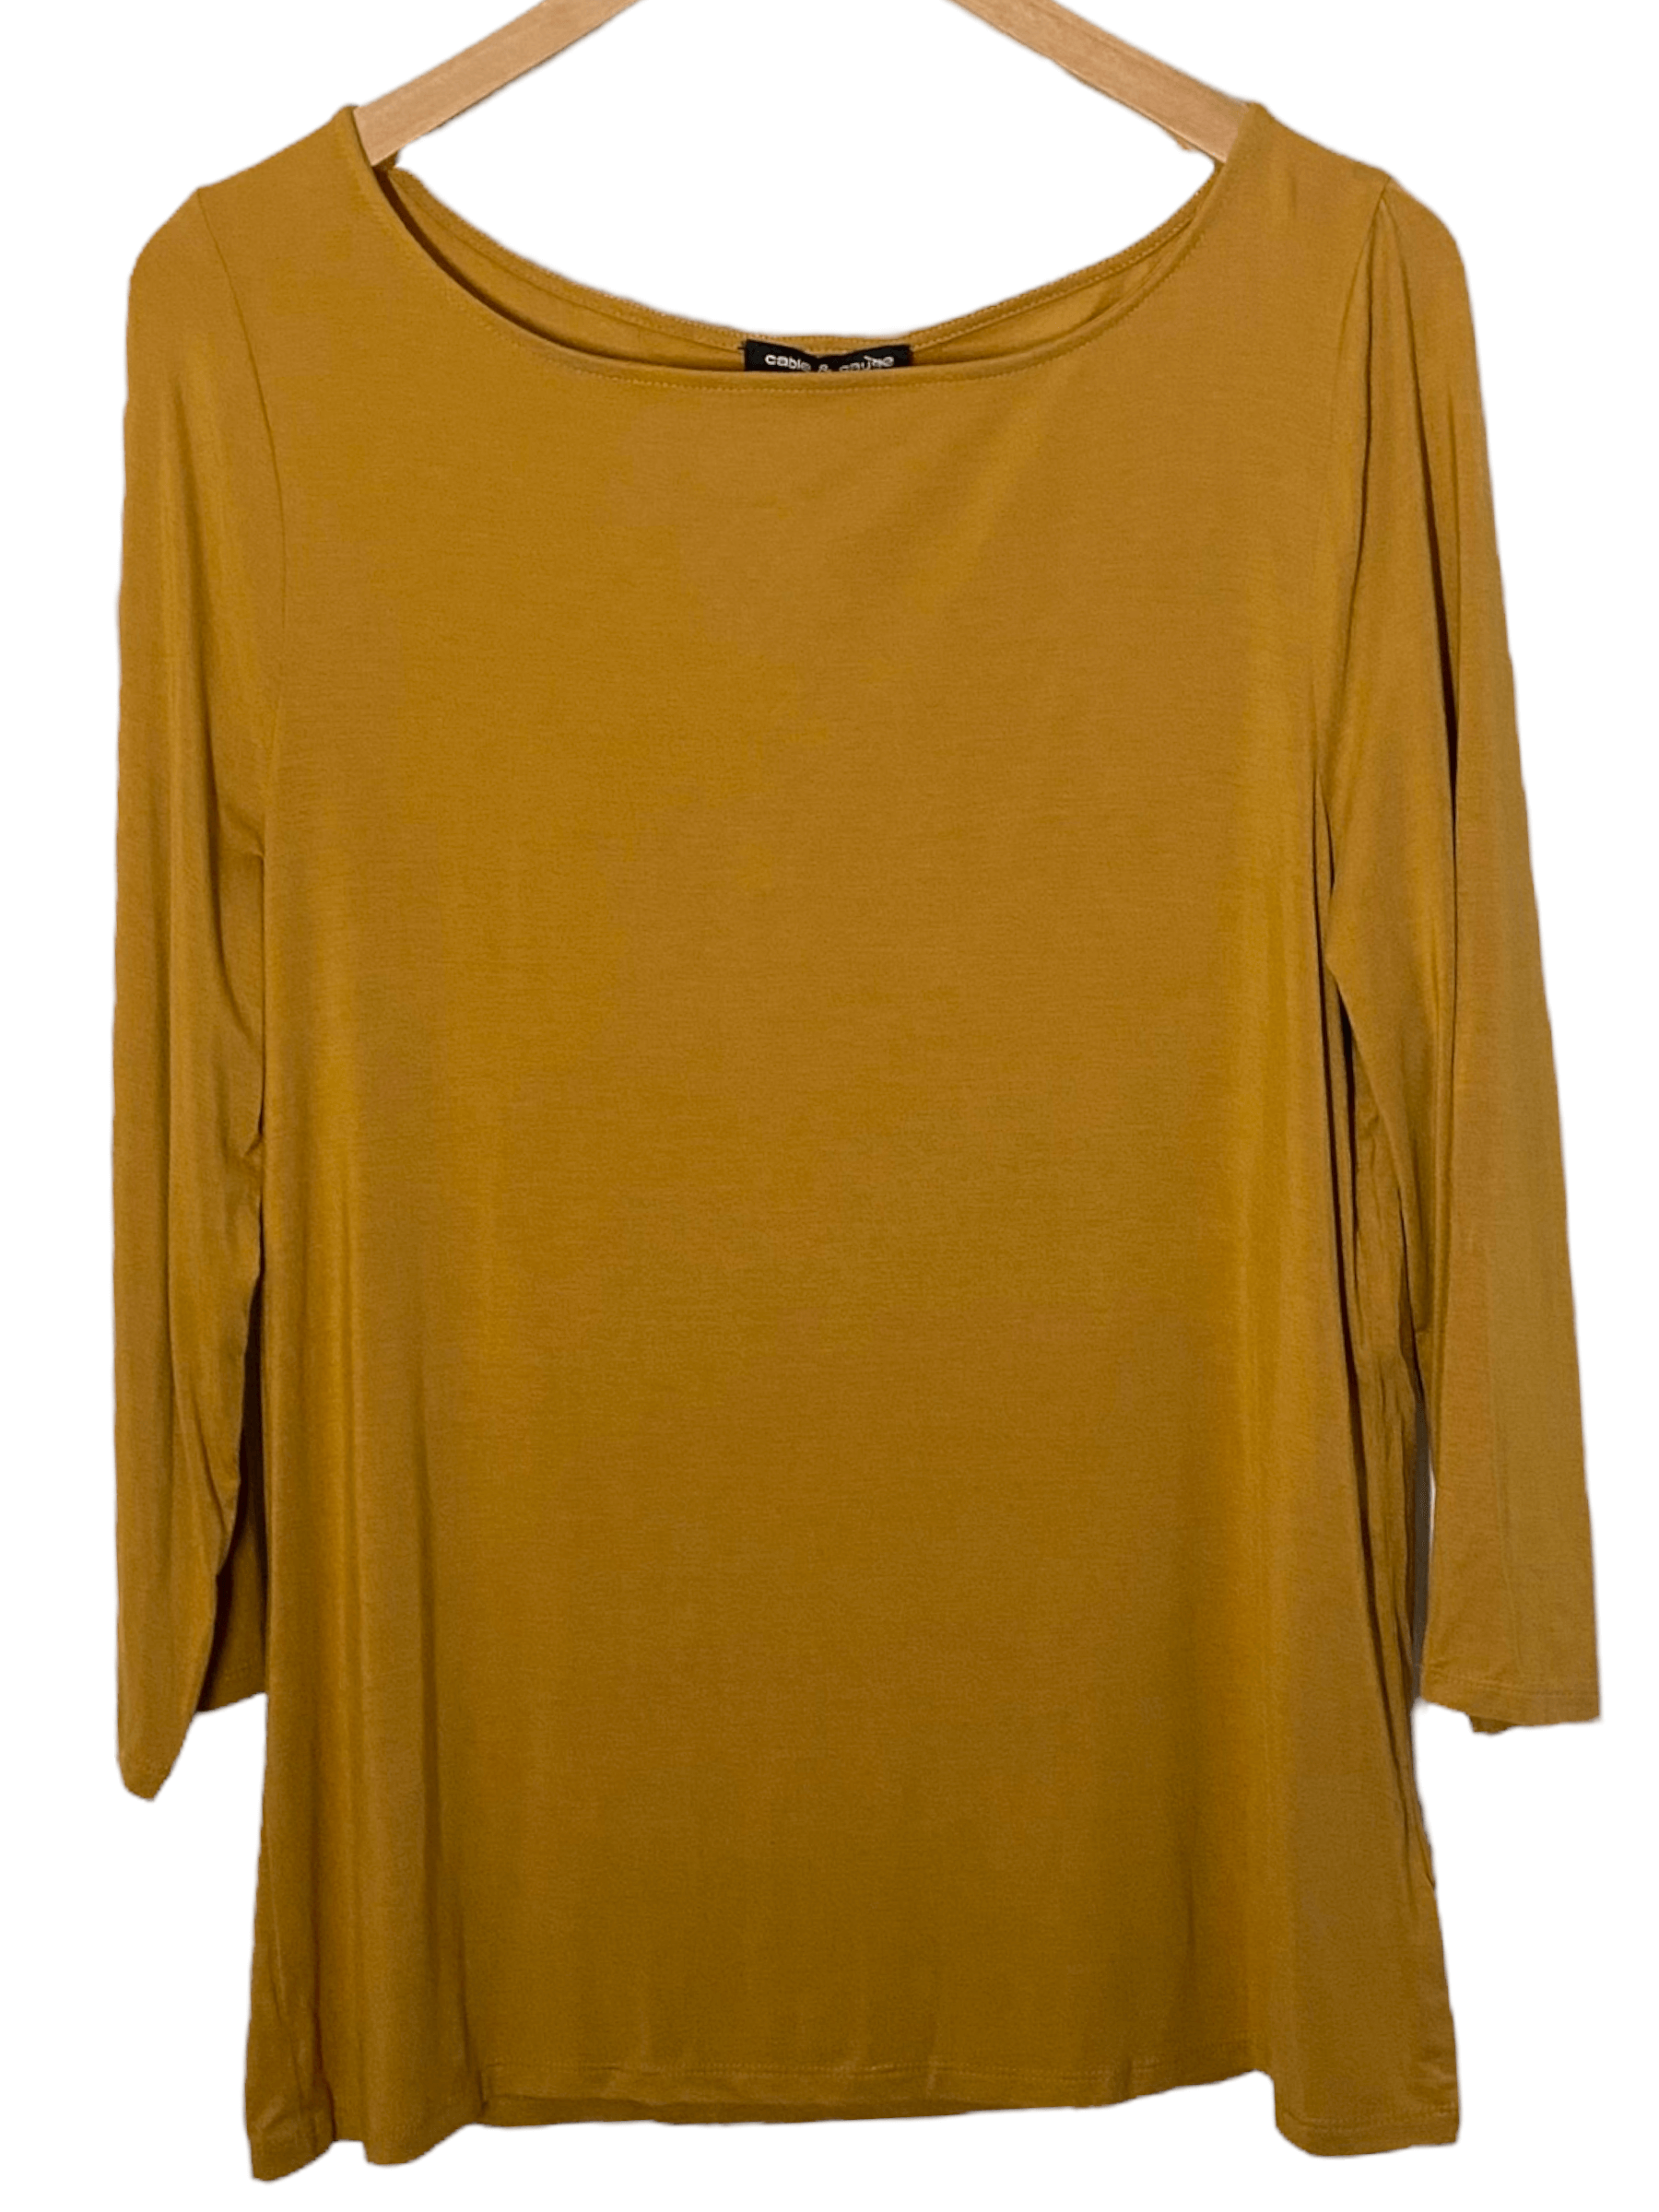 Dark Autumn CABLE AND GAUGE ochre wide neck knit top